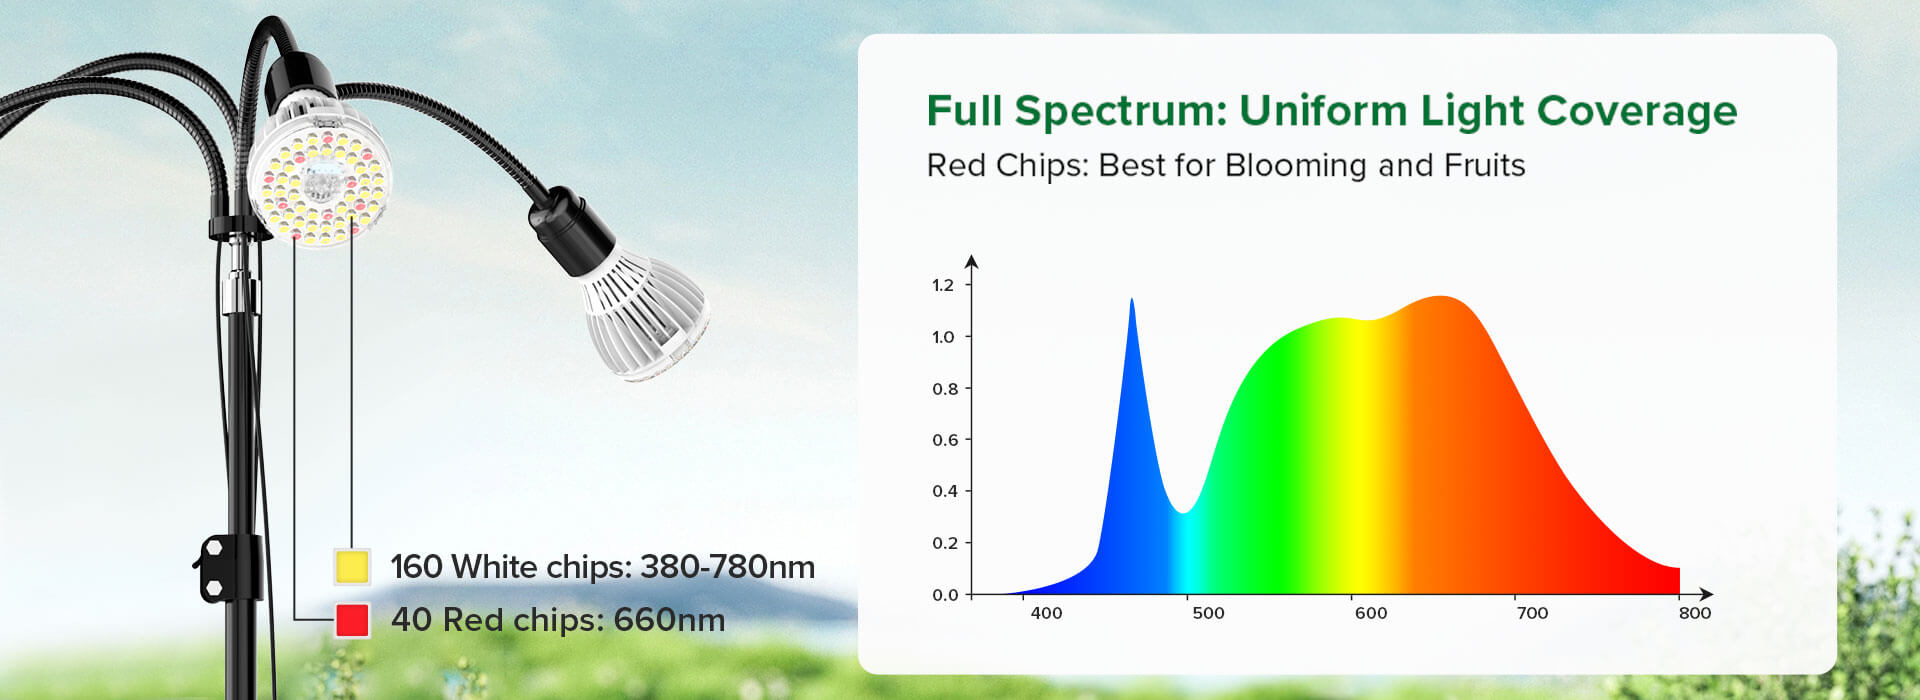 Full Spectrum: Uniform Light Coverage,Red Chips: Best for Blooming and Fruits.